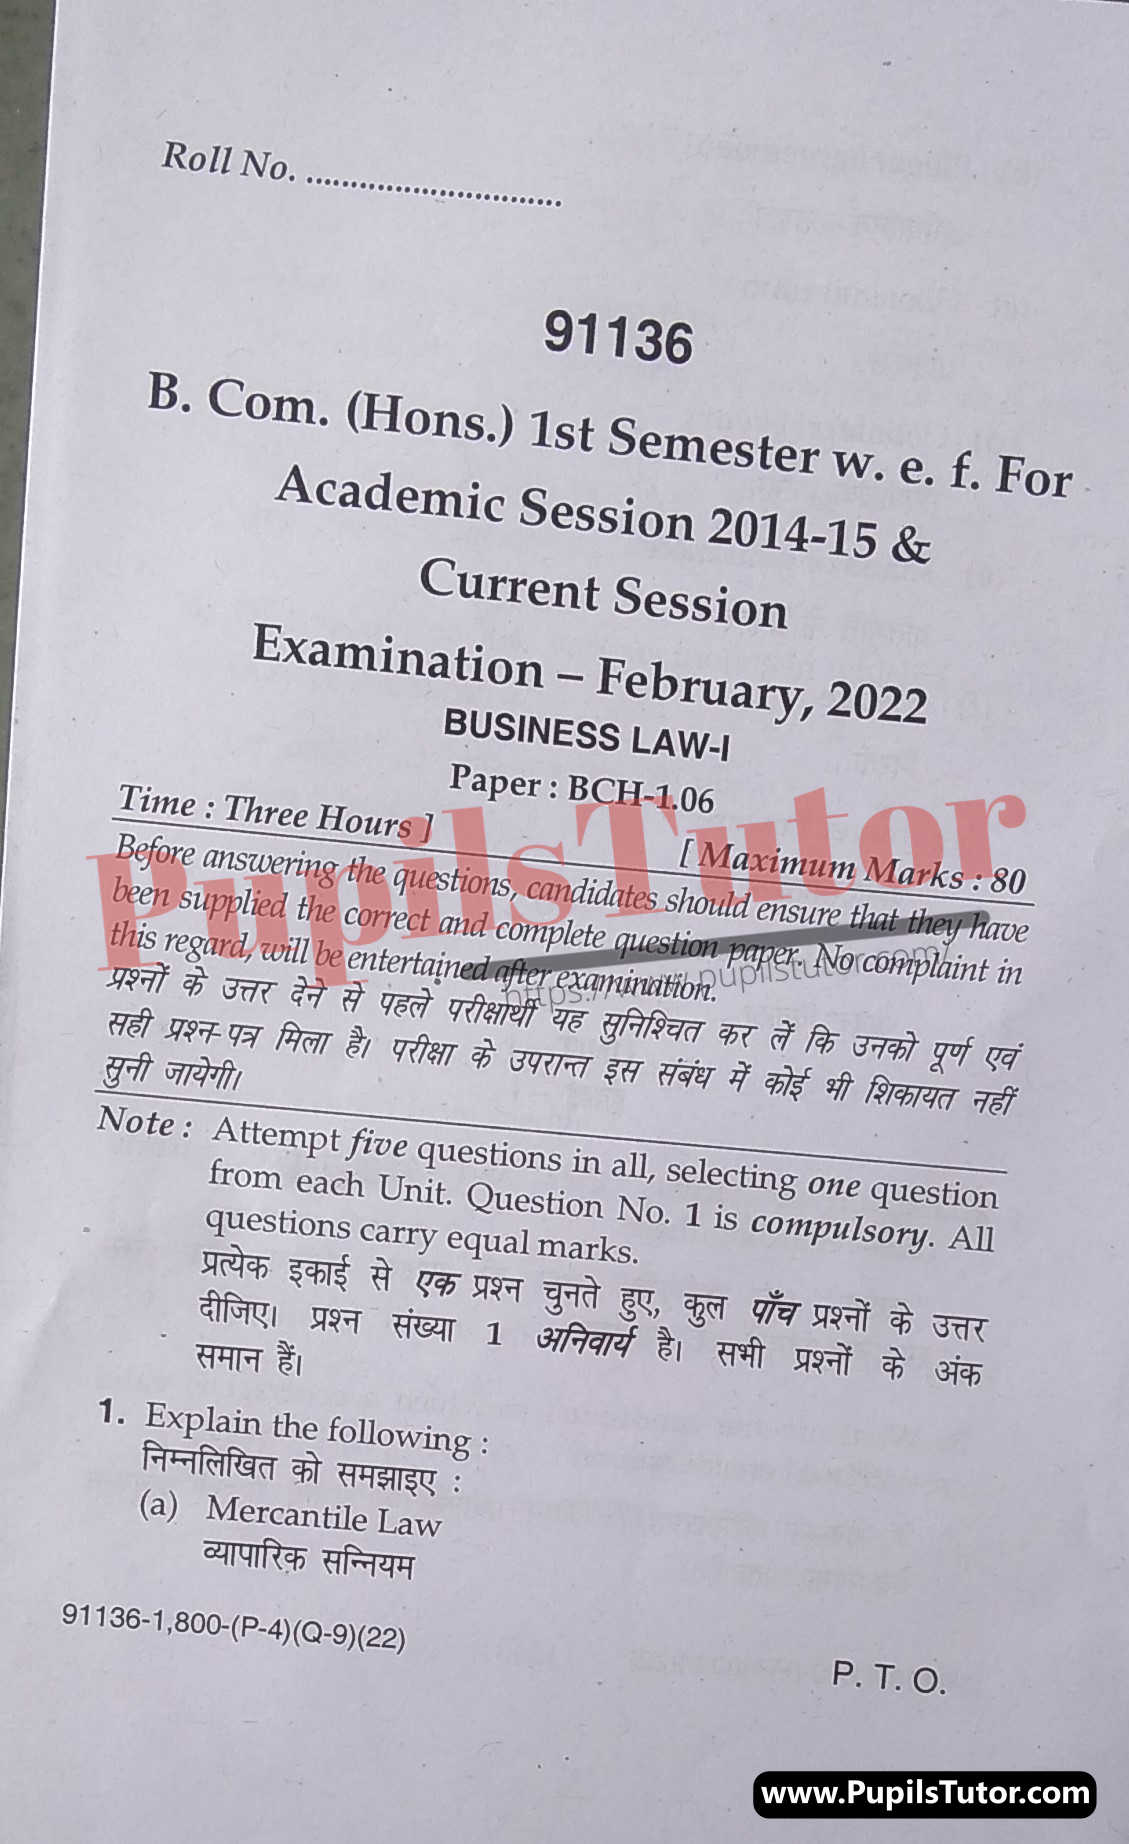 MDU (Maharshi Dayanand University, Rohtak Haryana) Bcom HONORS First Semester Previous Year Business Law Question Paper For February, 2022 Exam (Question Paper Page 1) - pupilstutor.com